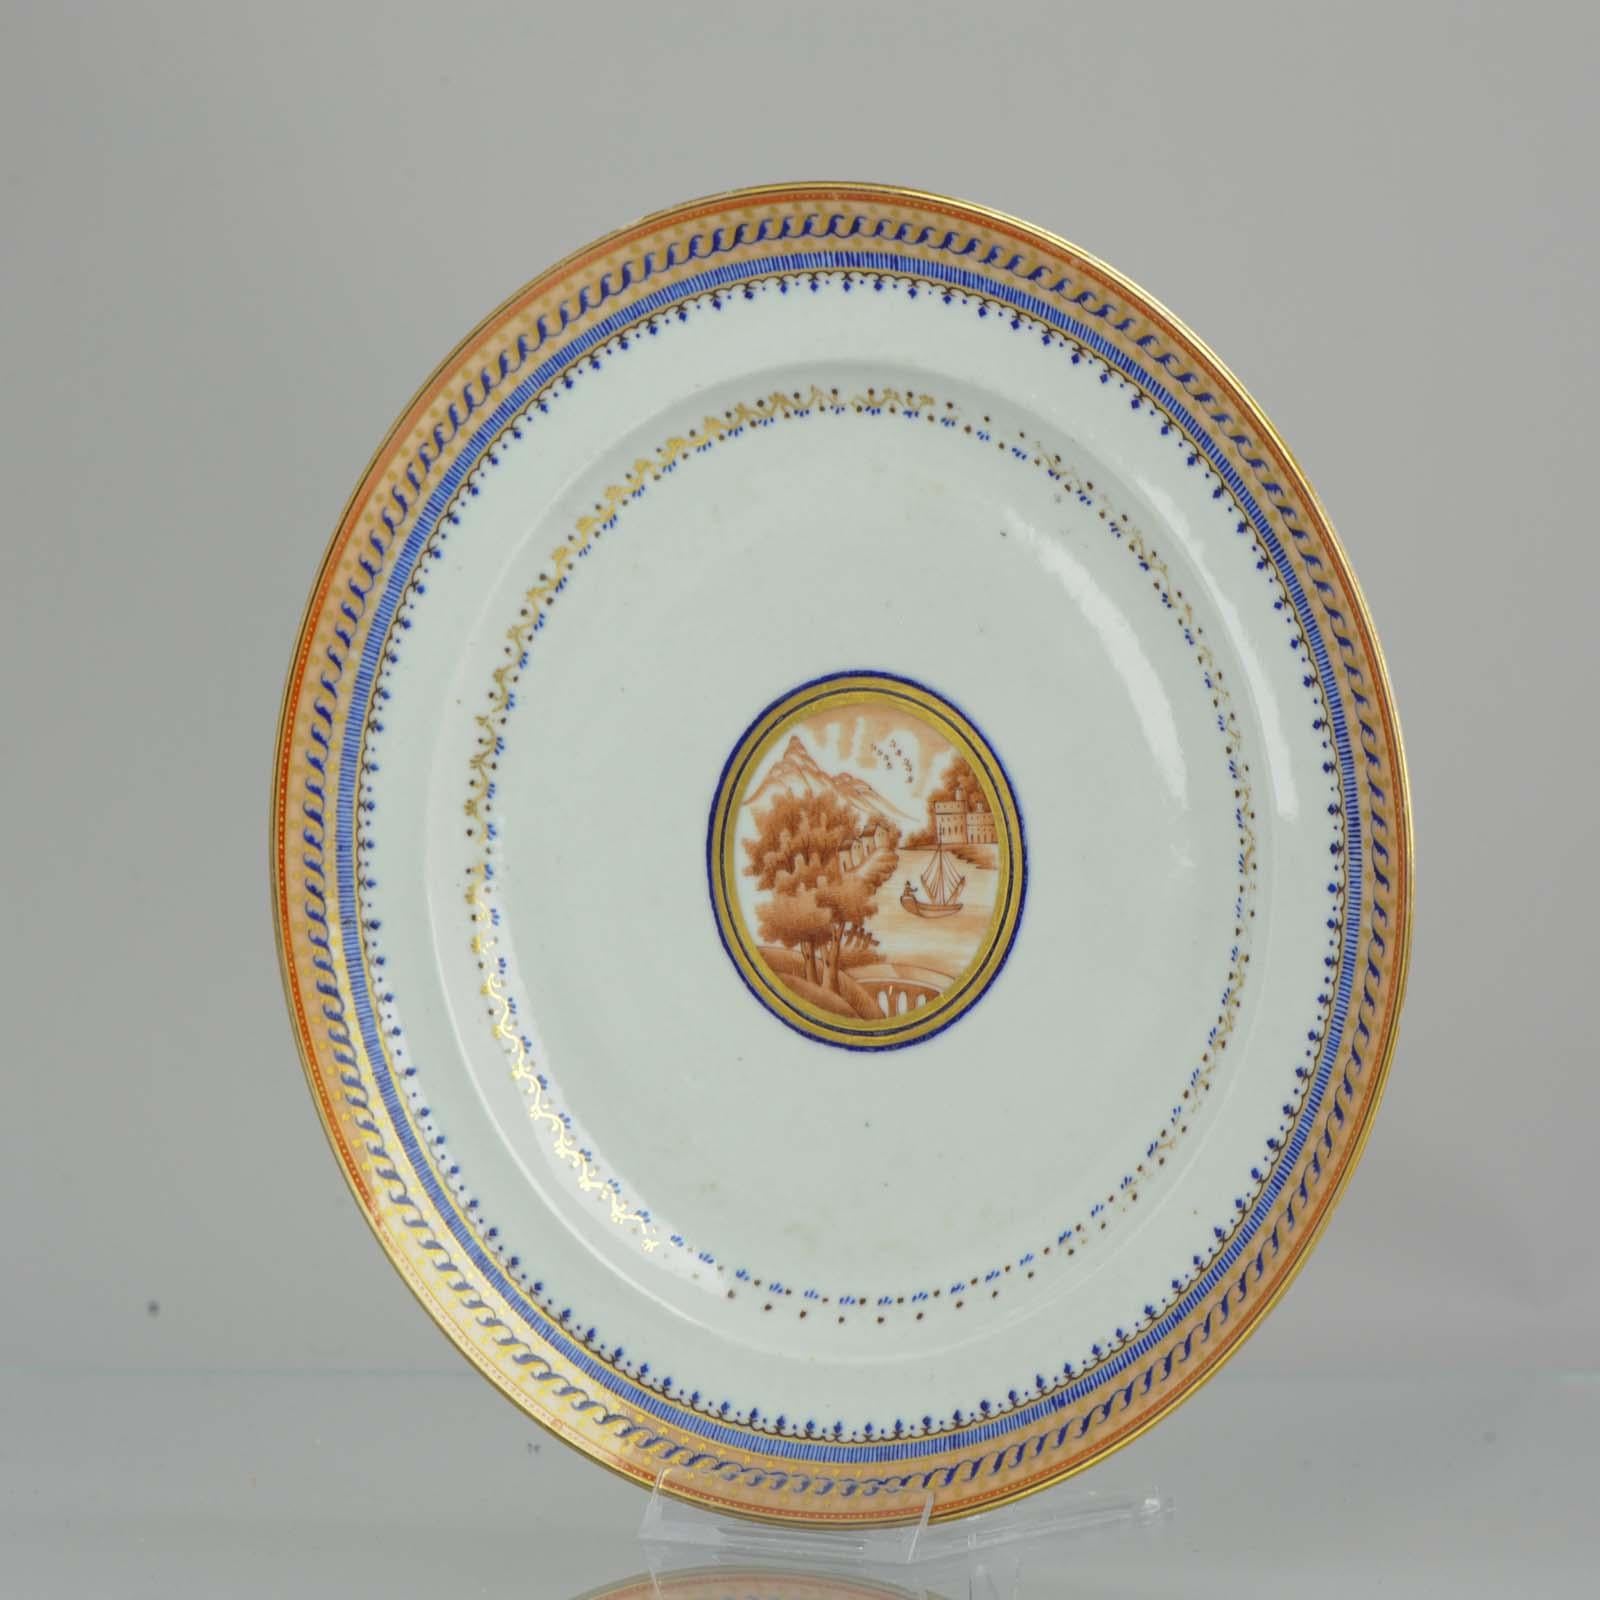 A rare, good conditioned, and quality painting plate.

Very nicely decorated piece with good details. Blue, sepia and gilt decoration, central sepia reserve 